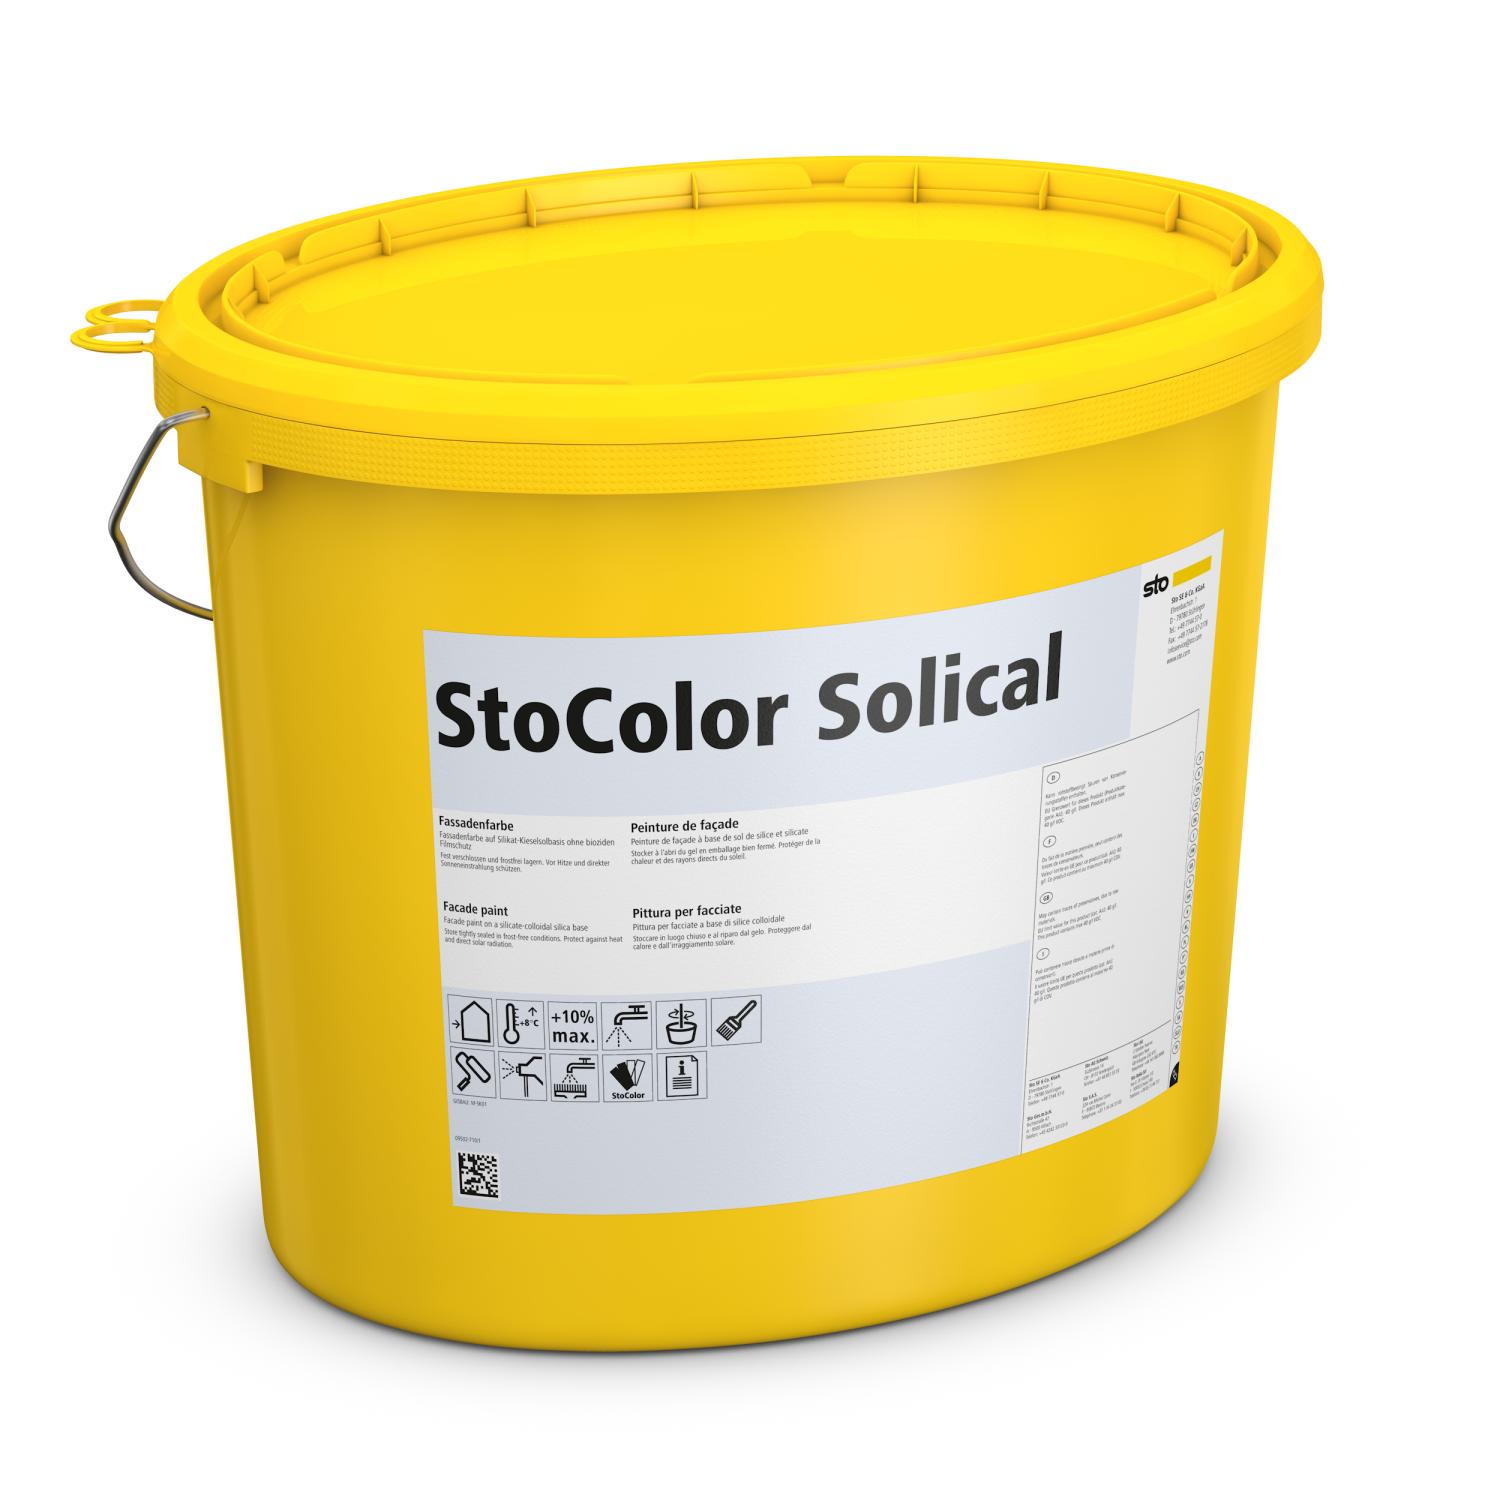 StoColor Solical